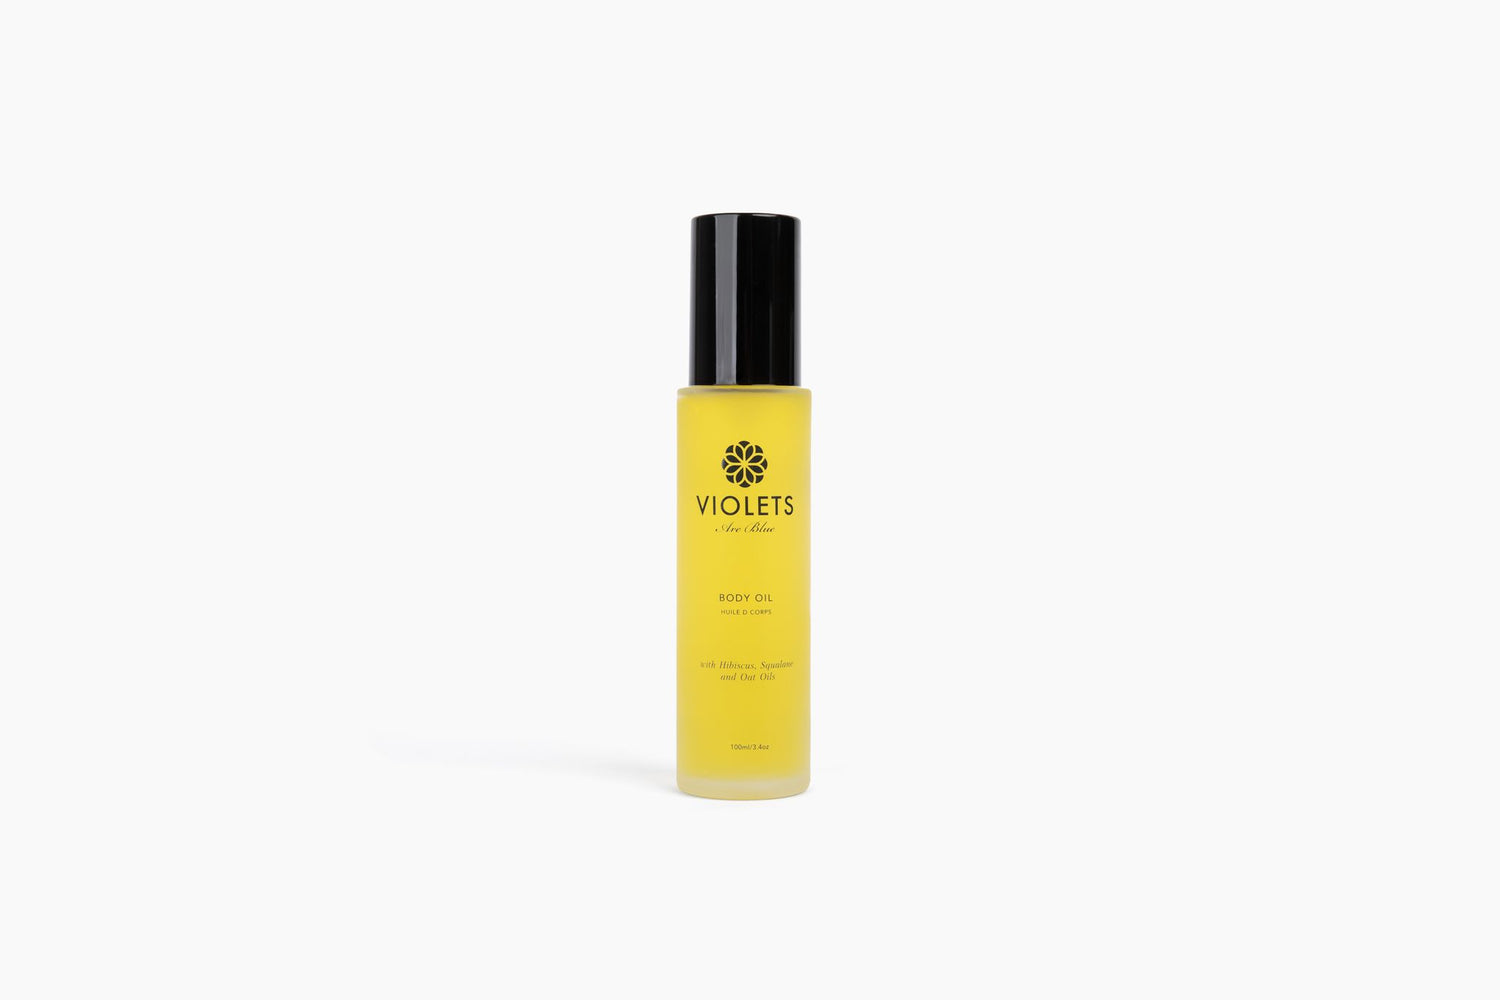 Body Oil with Hibiscus, Squalane and Oat Oils